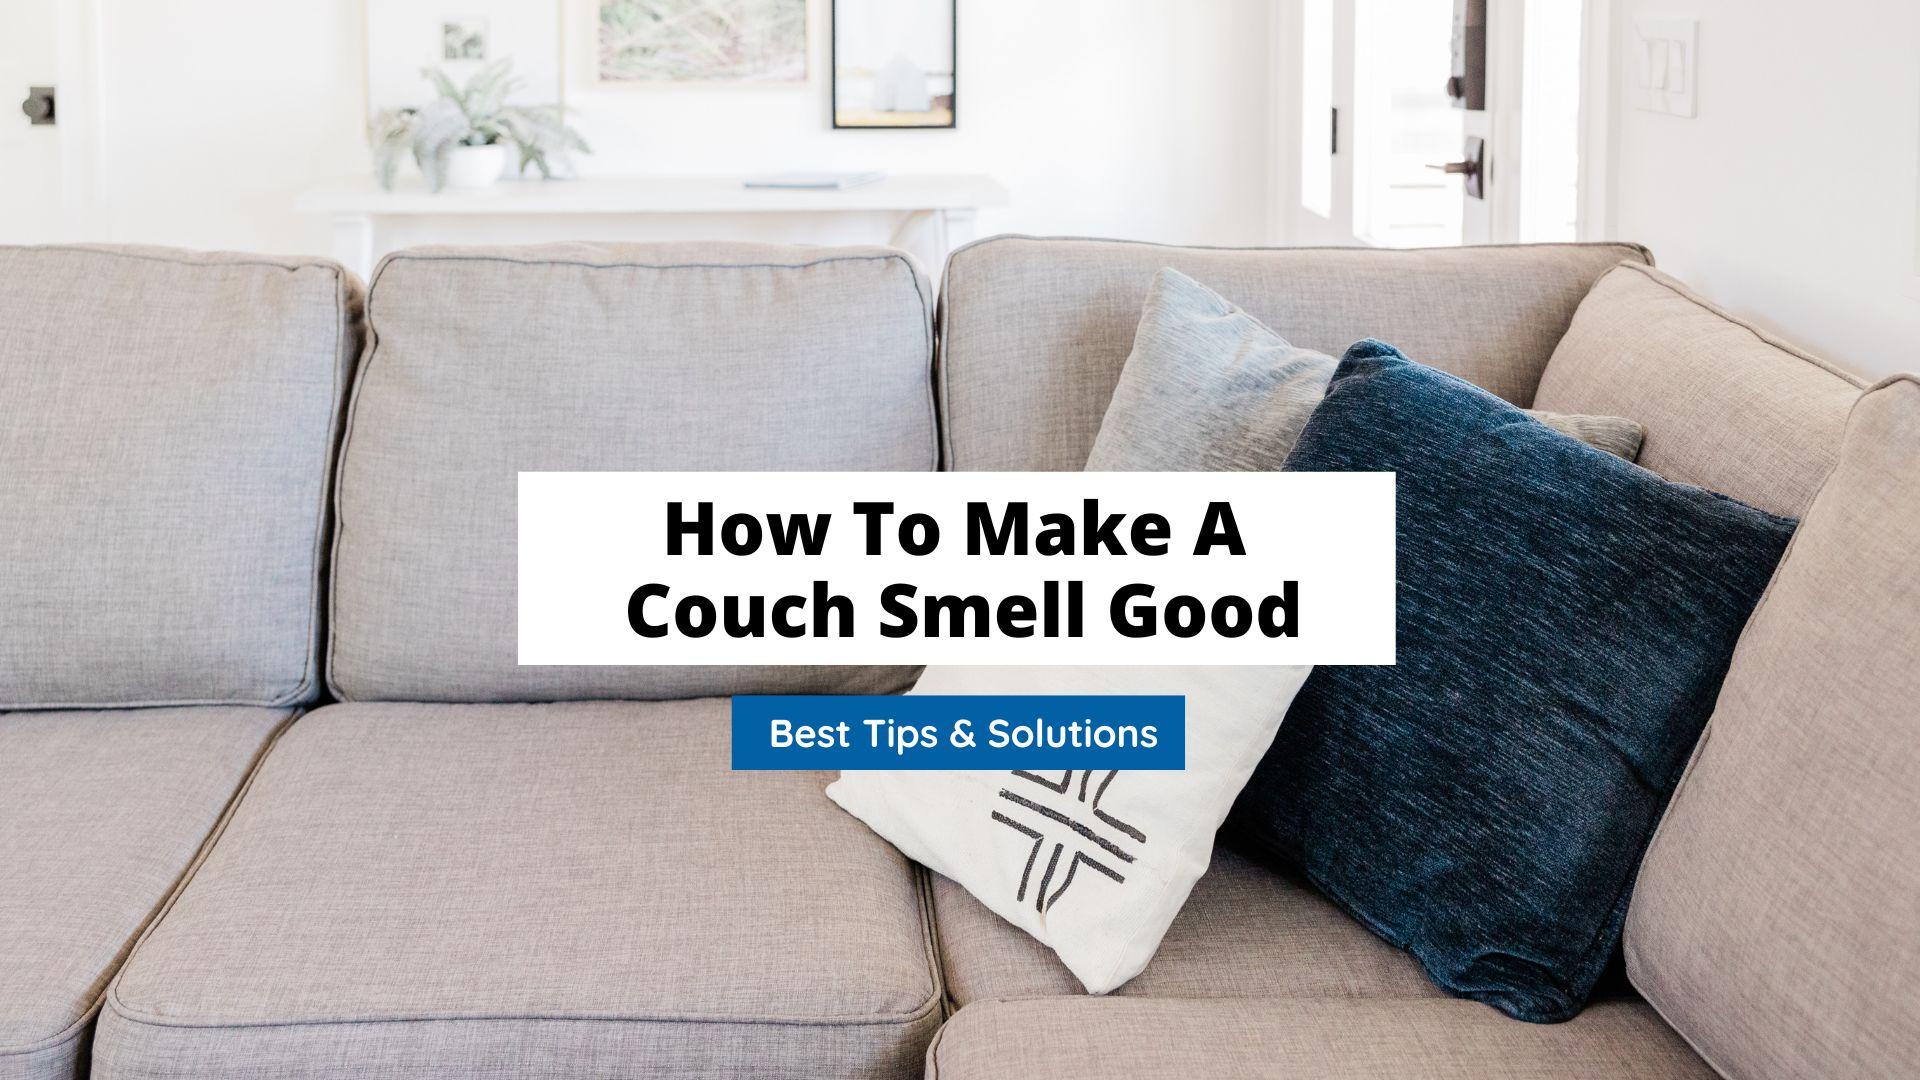 How To Make A Couch Smell Good